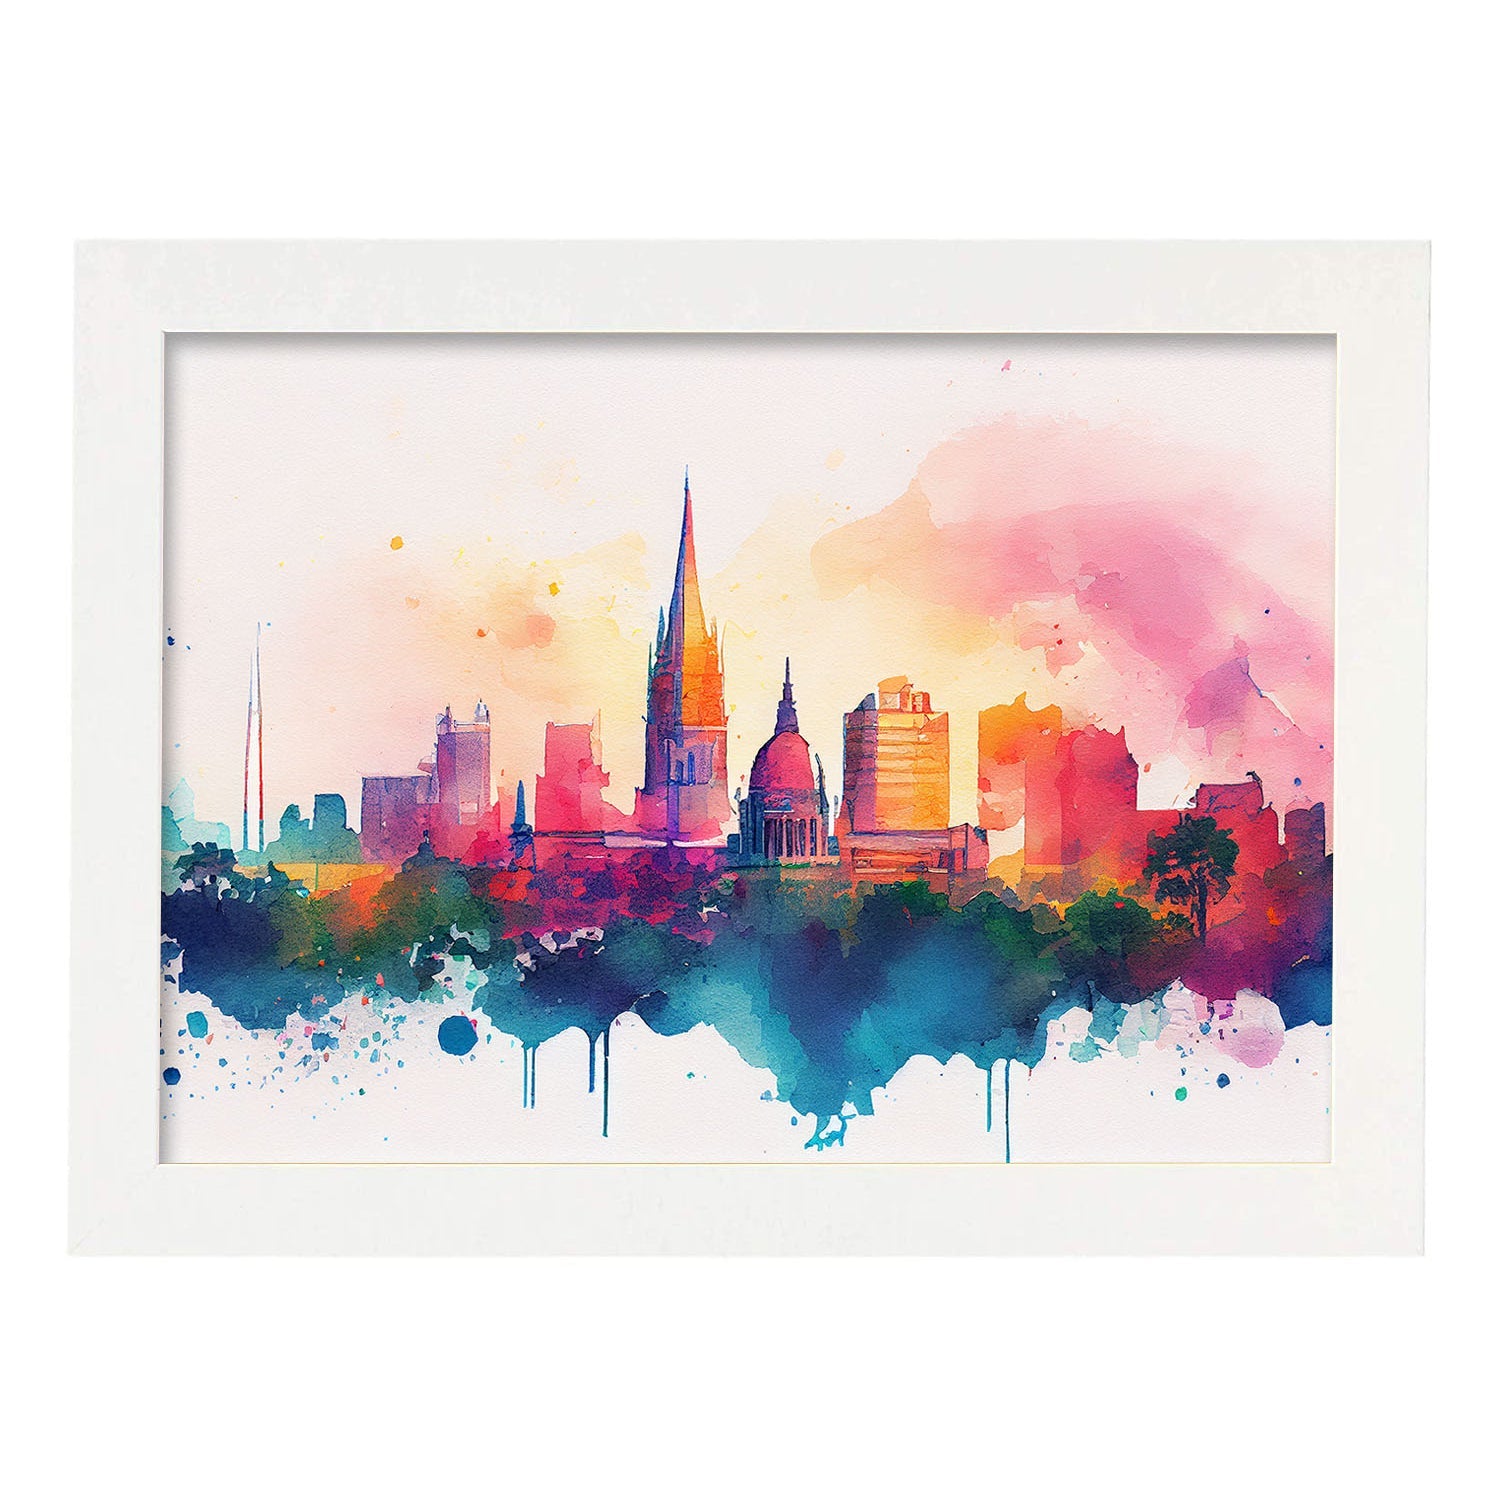 Nacnic watercolor of a skyline of the city of Bangalore. Aesthetic Wall Art Prints for Bedroom or Living Room Design.-Artwork-Nacnic-A4-Marco Blanco-Nacnic Estudio SL